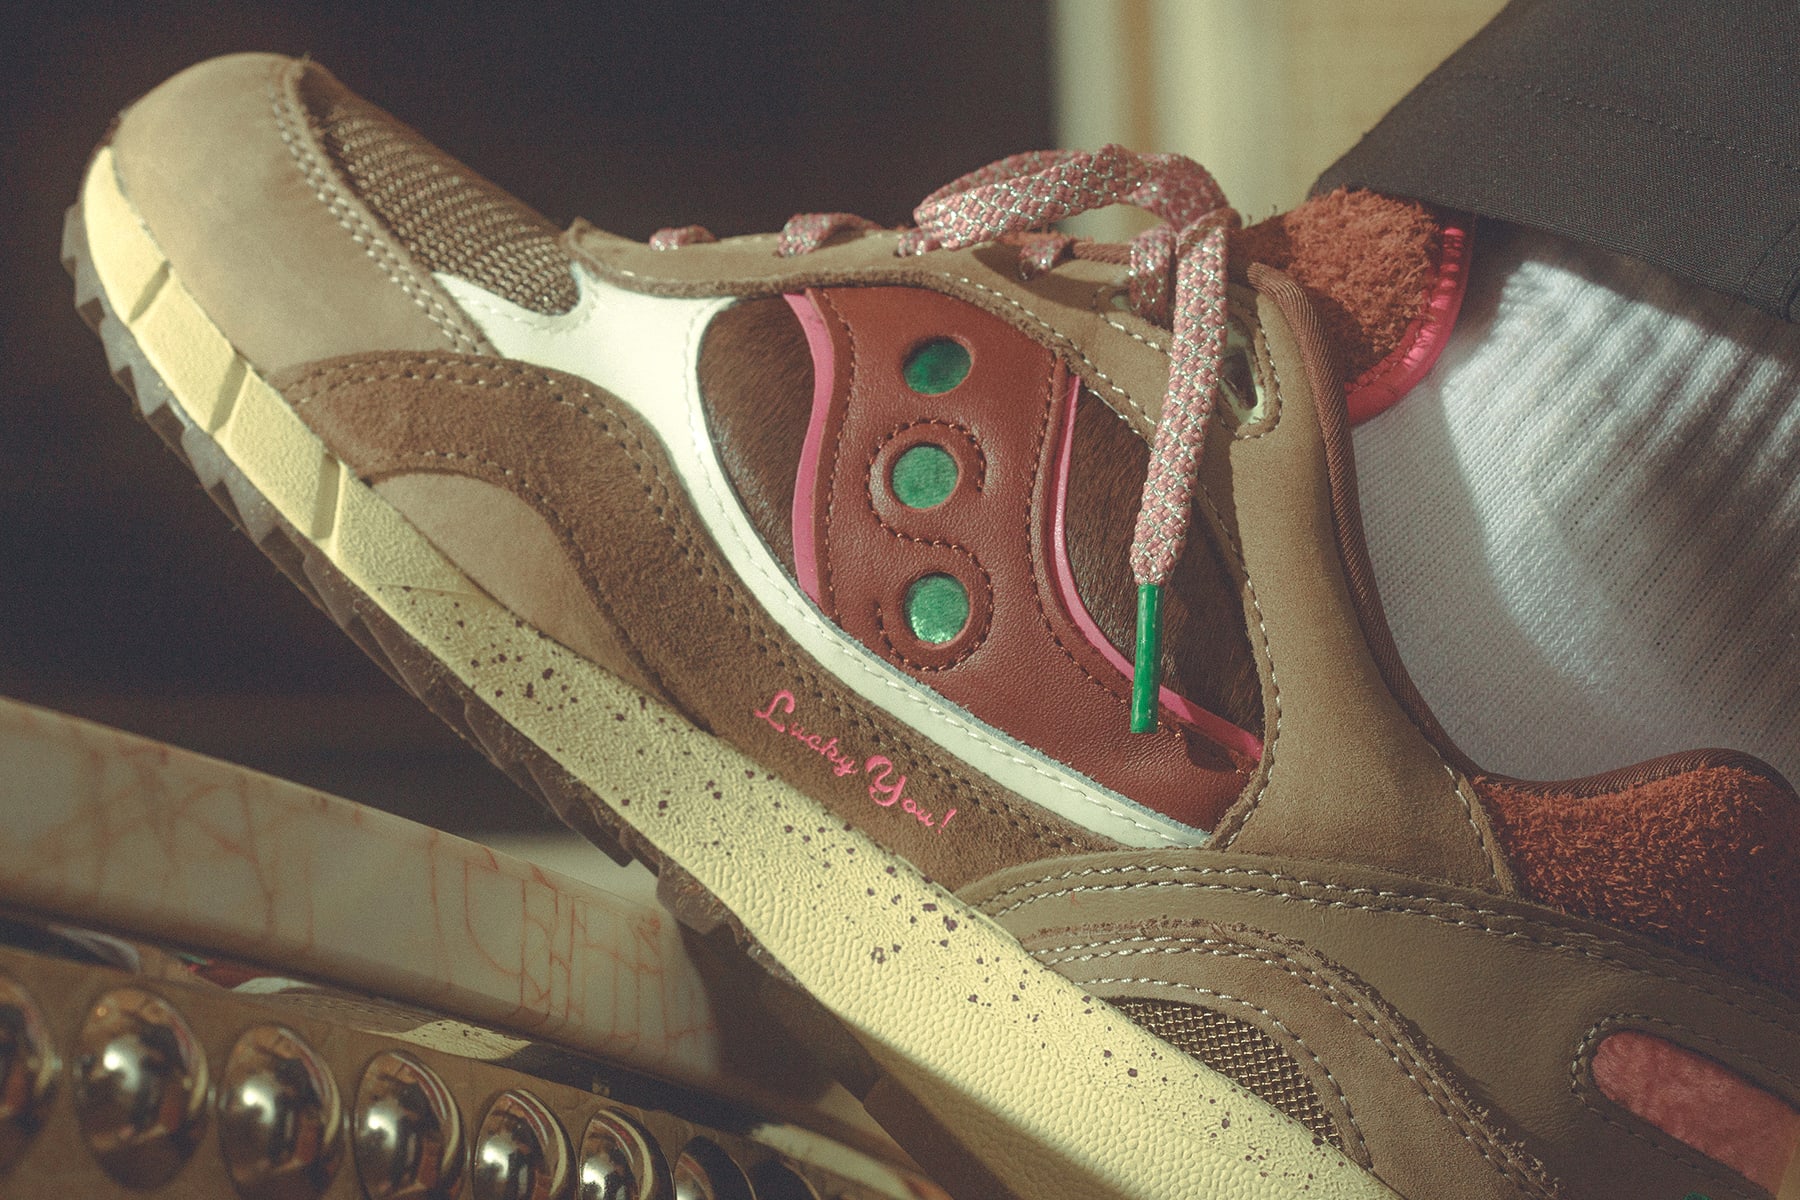 Feature x Saucony Shadow 6000 'Chocolate Chip'